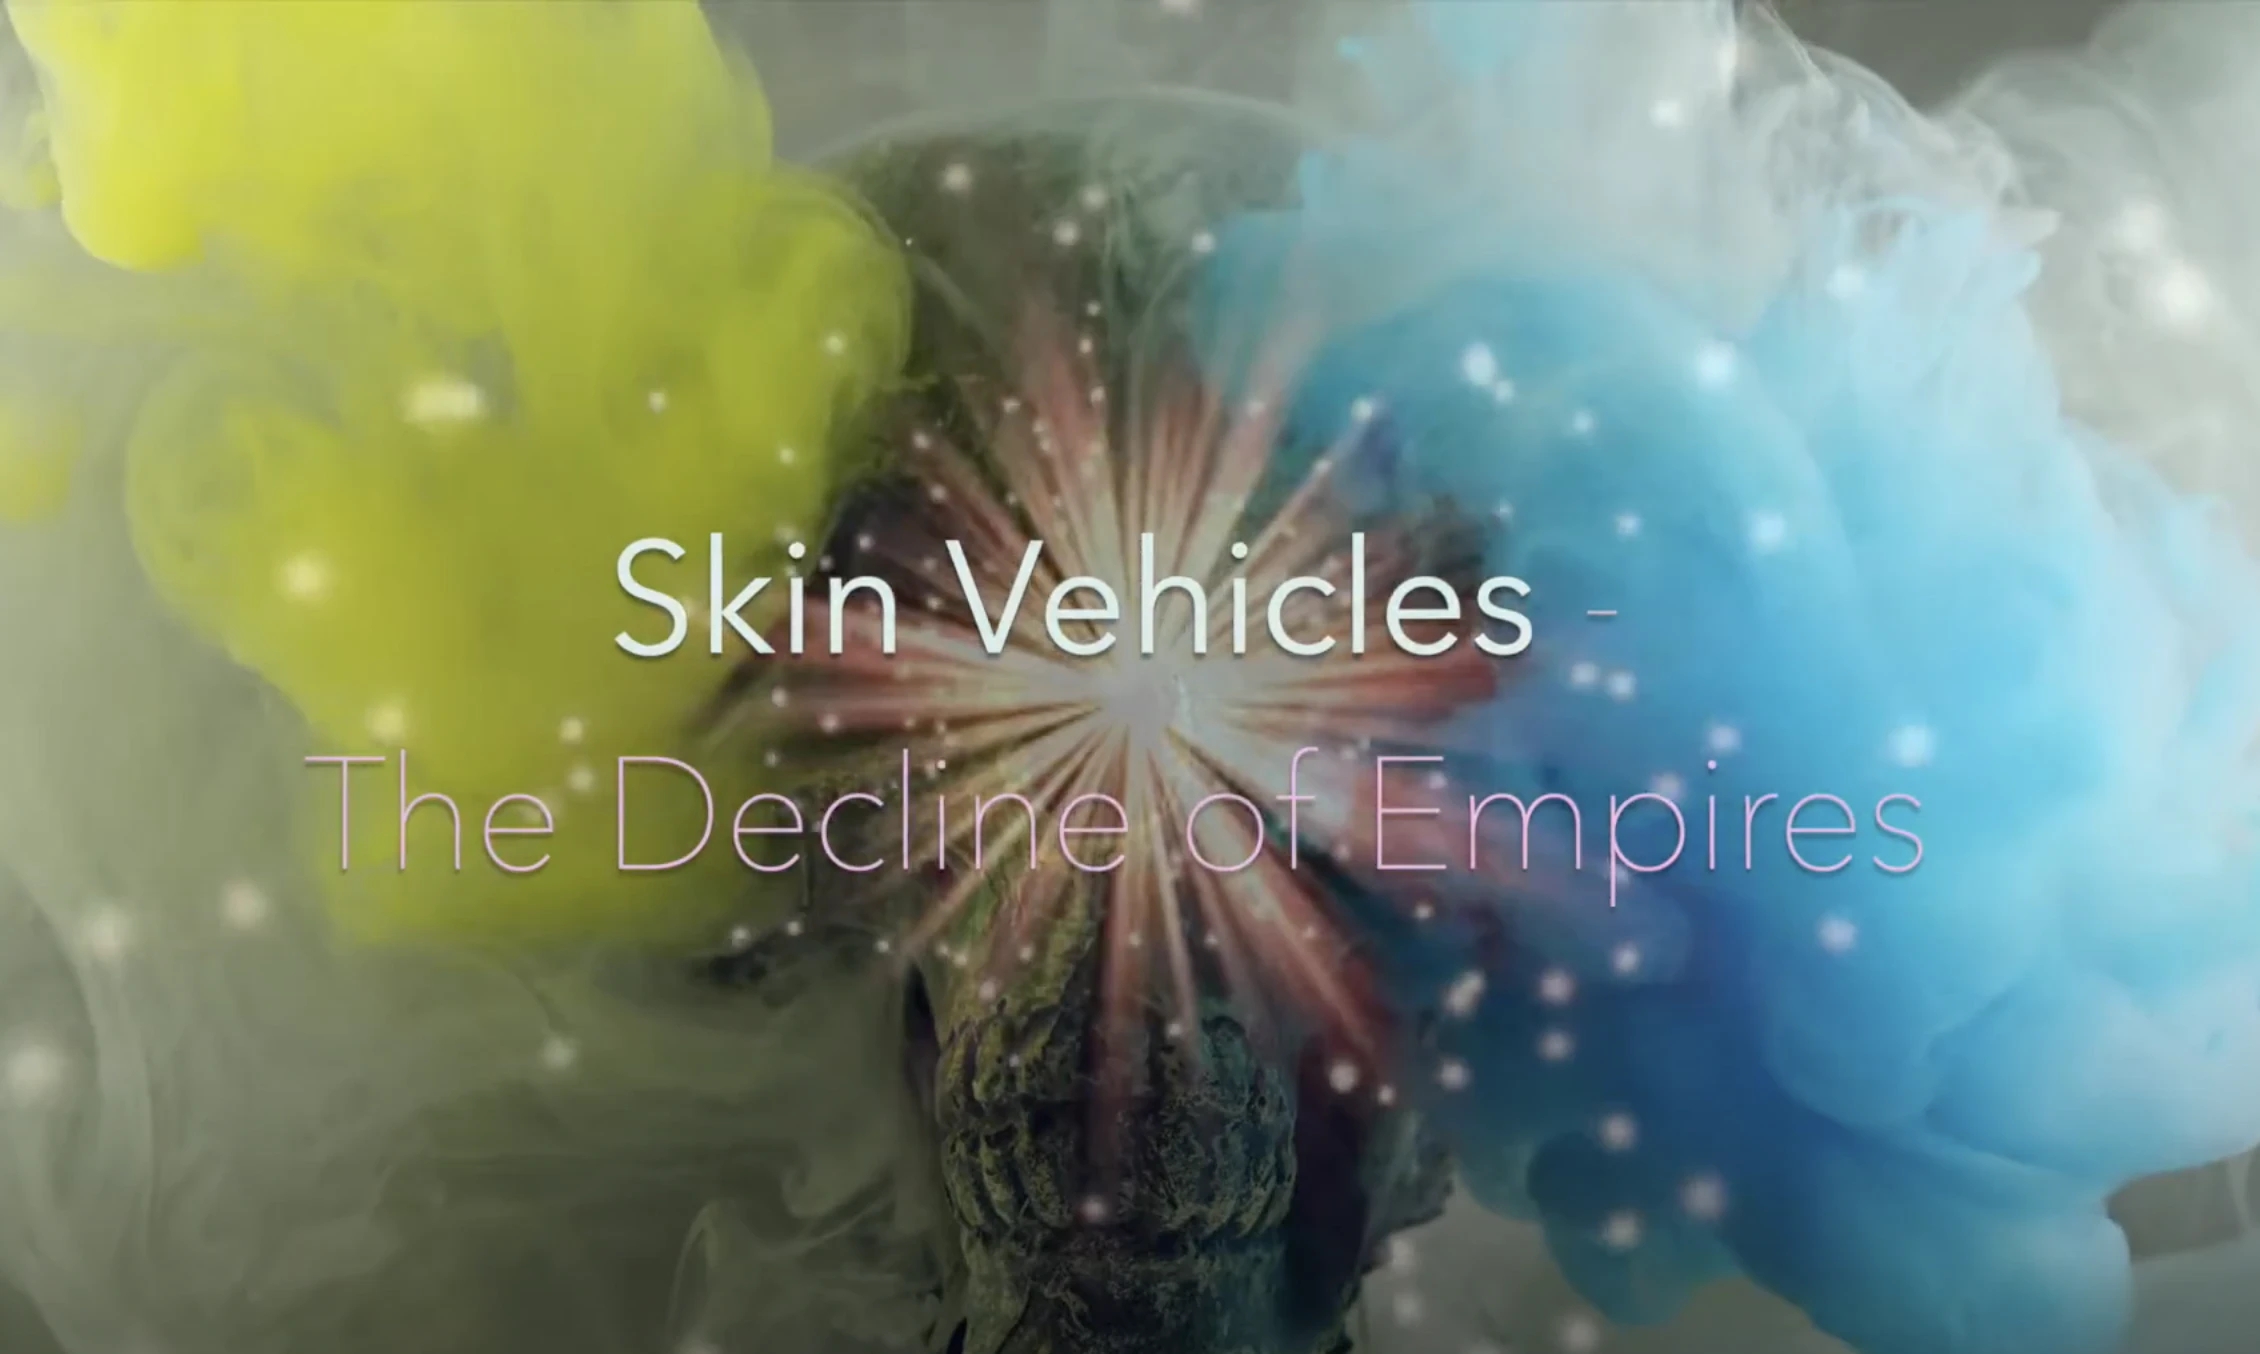 The Decline of Empires - Skin Vehicles